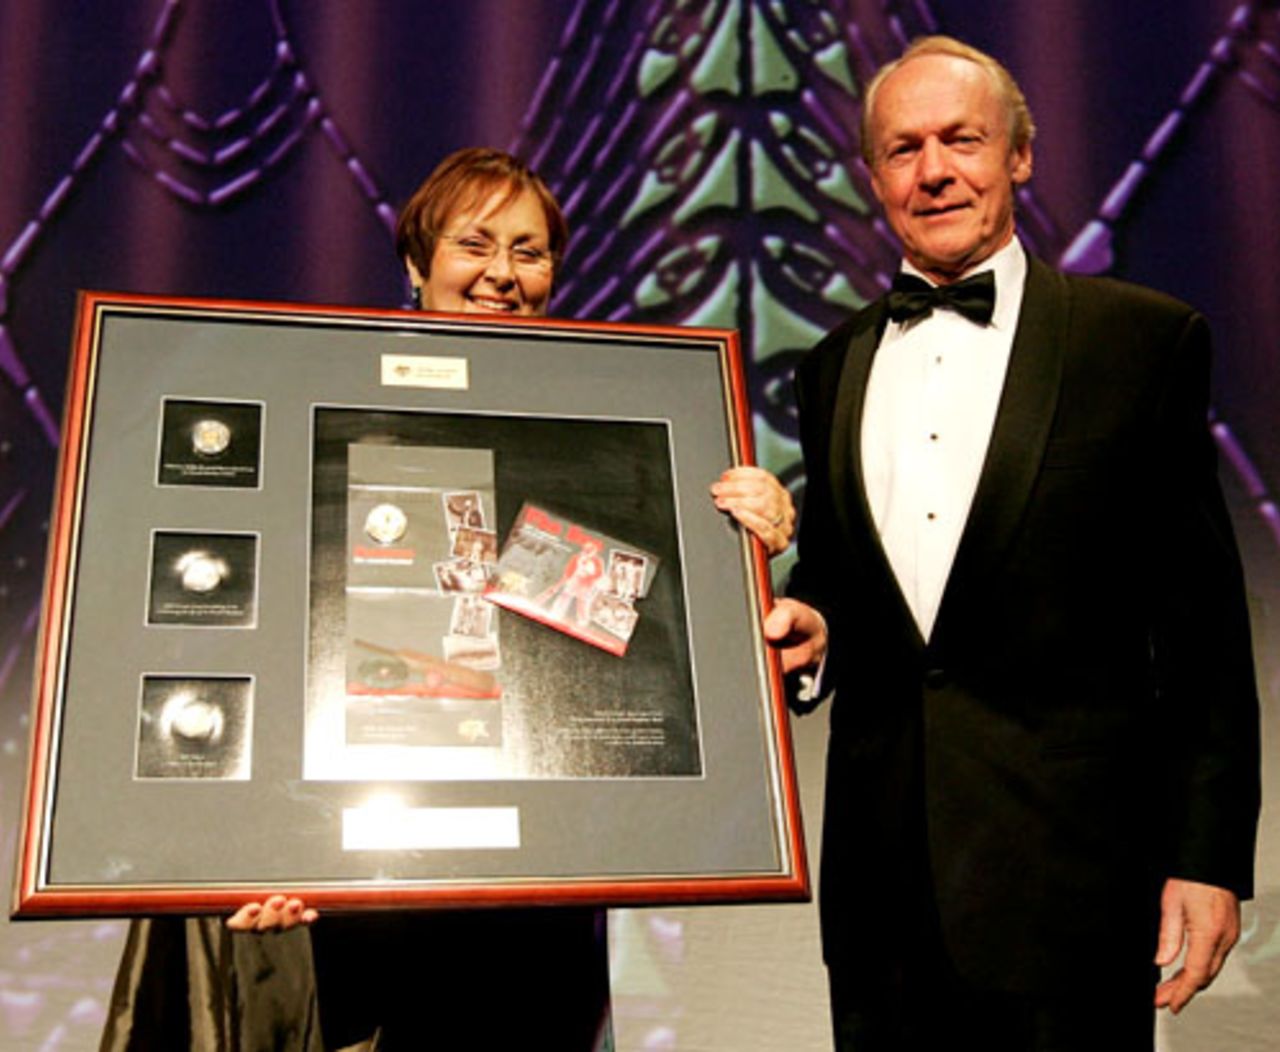 Janine Murphy of the Royal Australian Mint presents John Bradman with a montage of a commemorative coin, Sydney, August 27, 2008